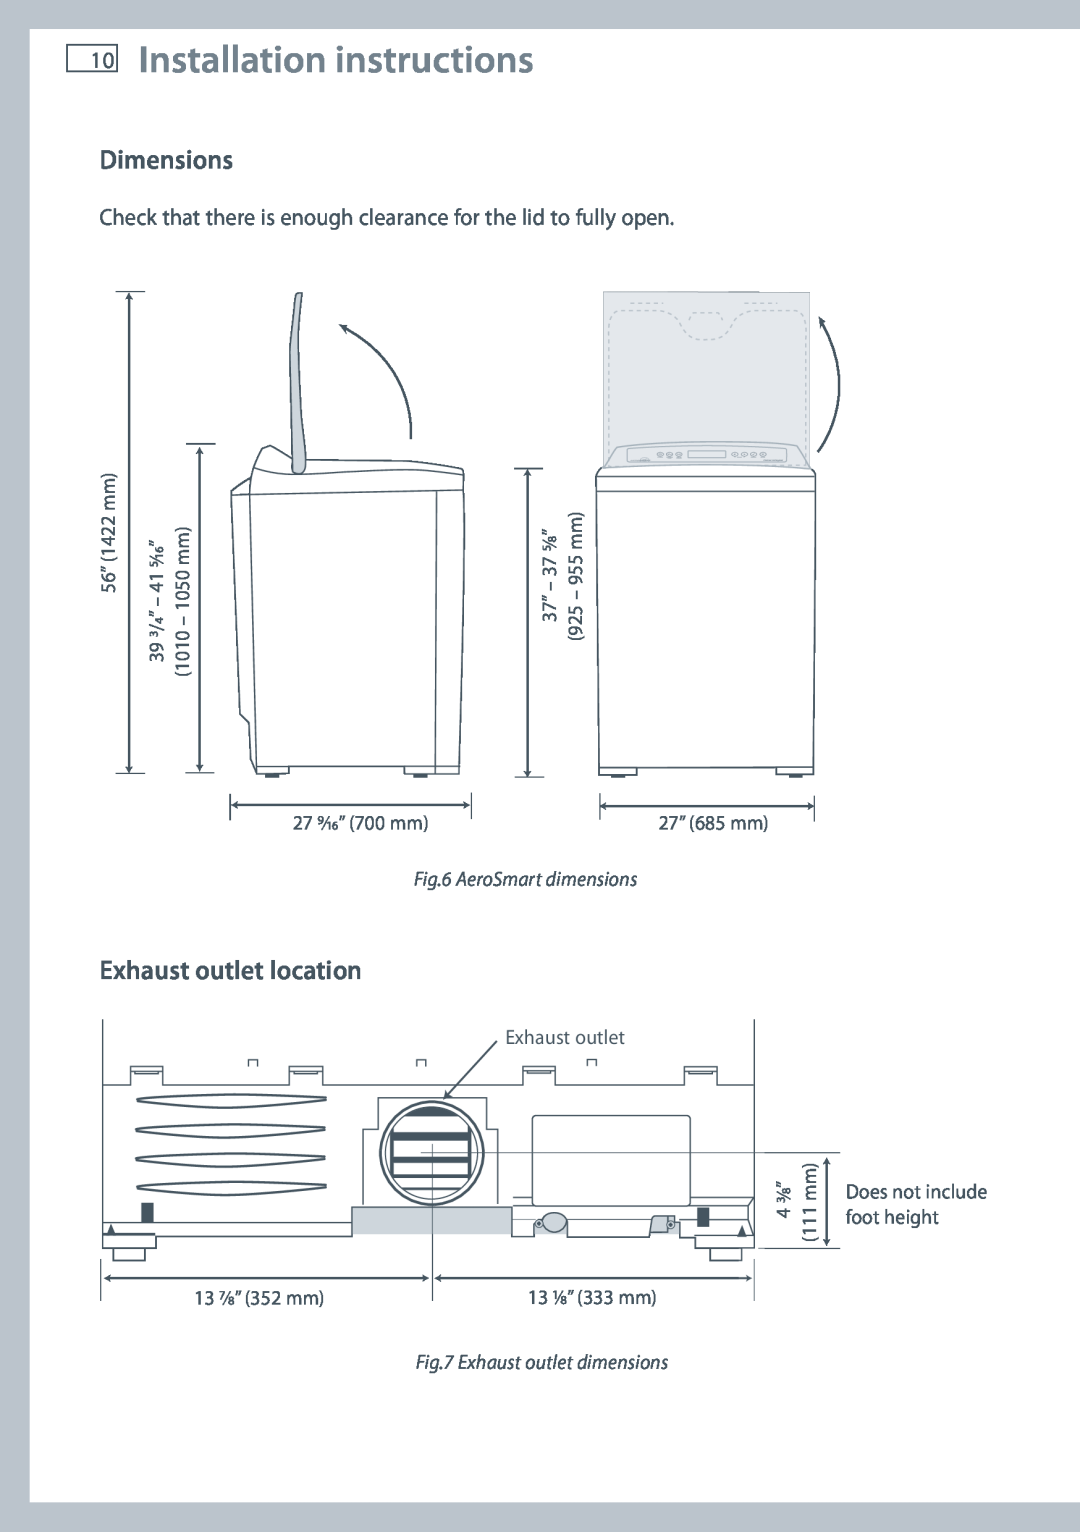 Fisher & Paykel DG62T27C Installation instructions, Dimensions, Exhaust outlet location, Exhaust outlet dimensions, 4 3⁄8” 